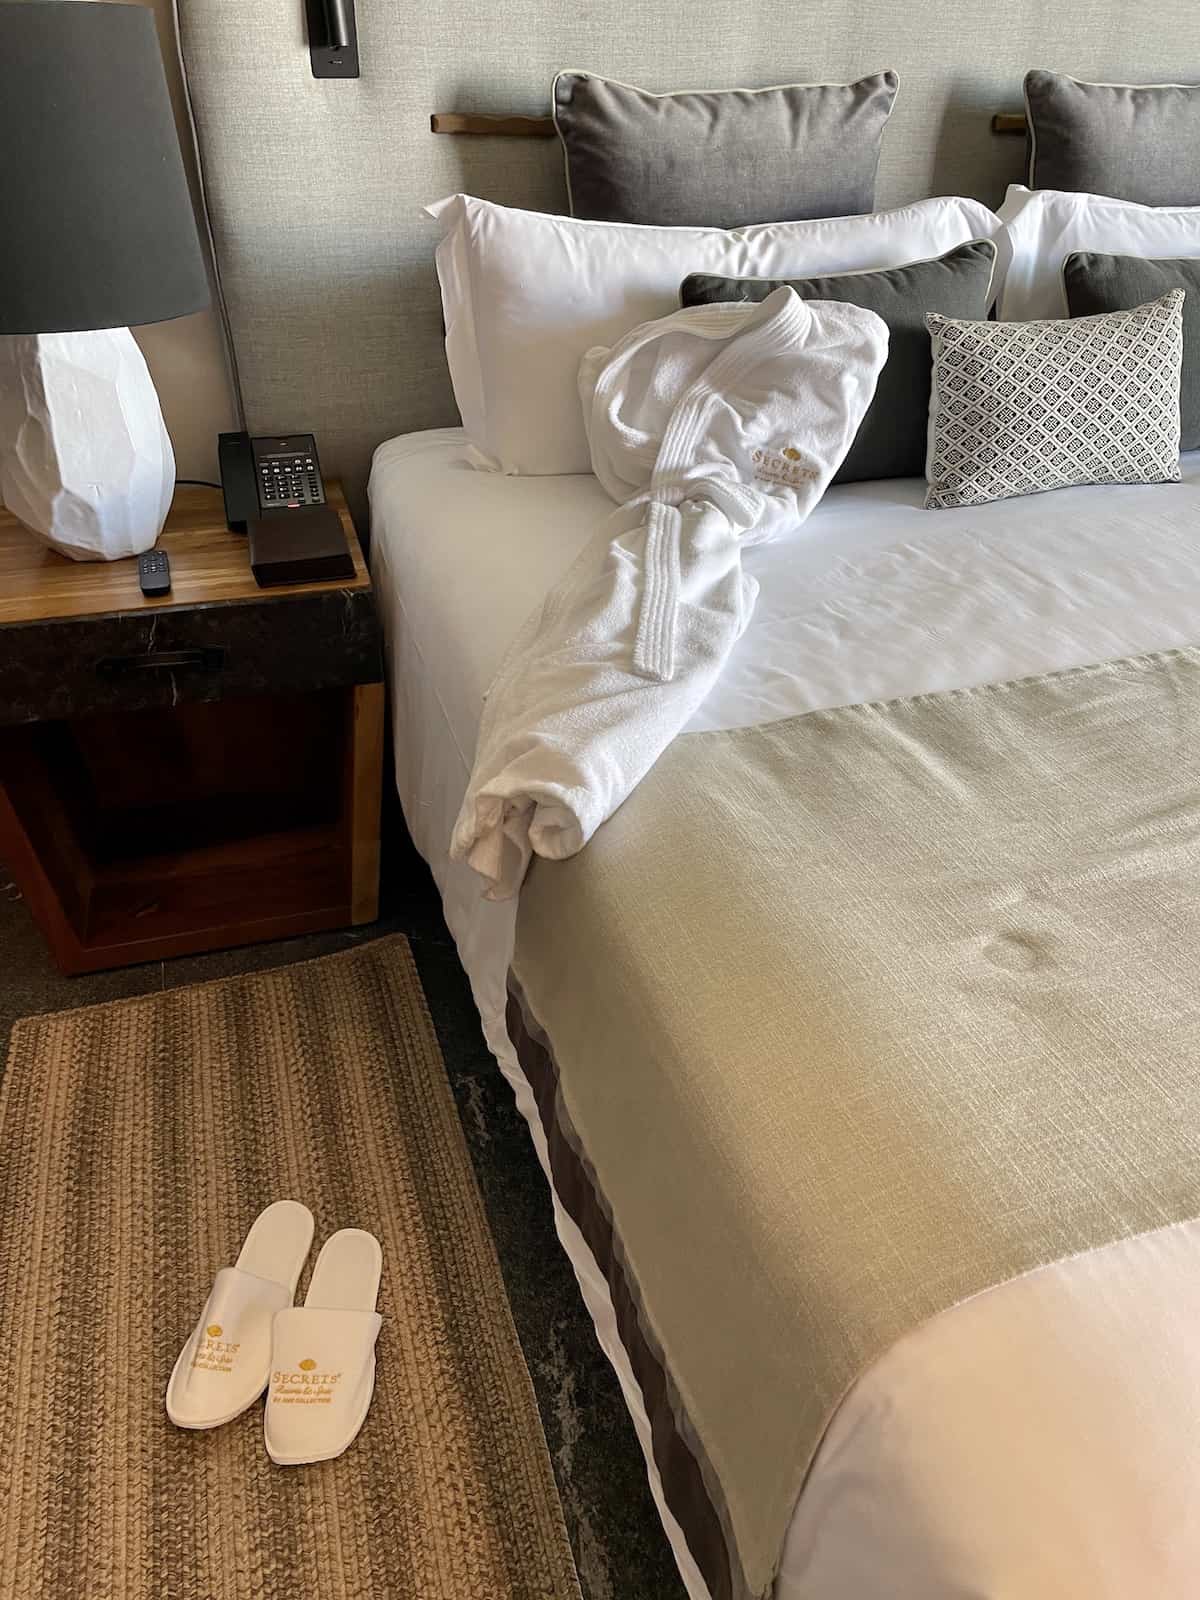 Bed with slippers and robe.